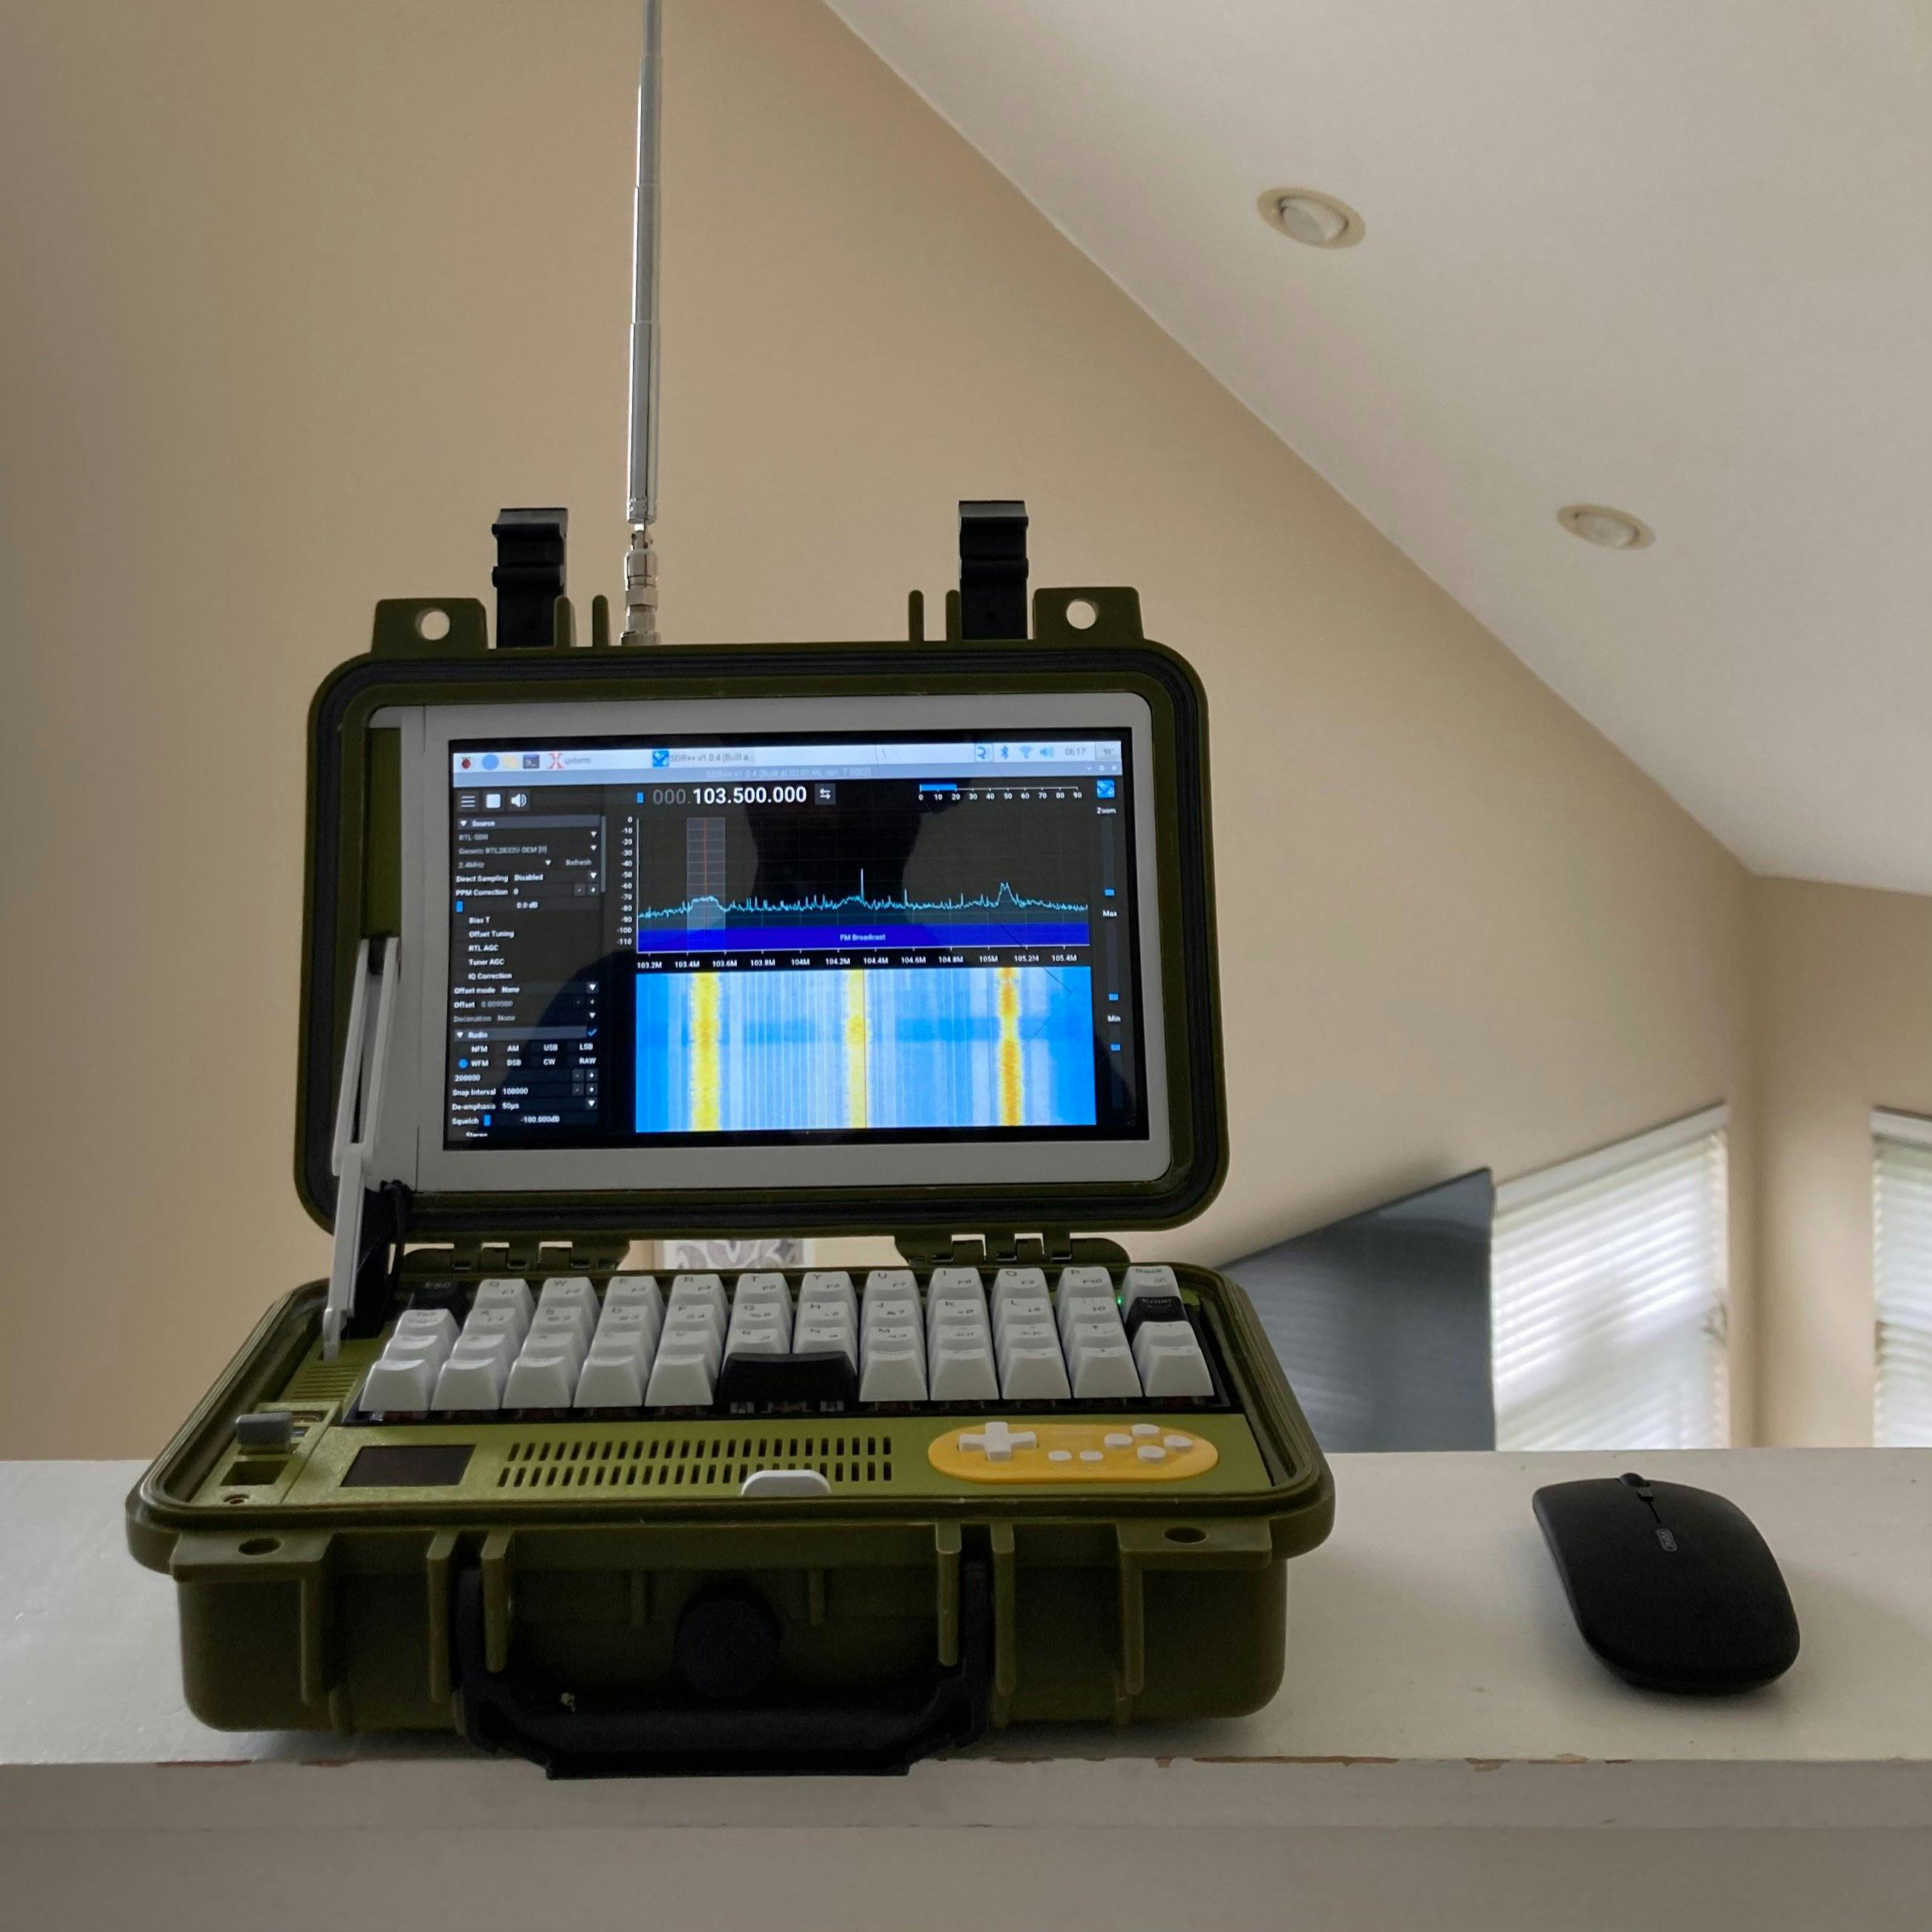 New Software Defined Radio Adventures with the RTL-SDR V4